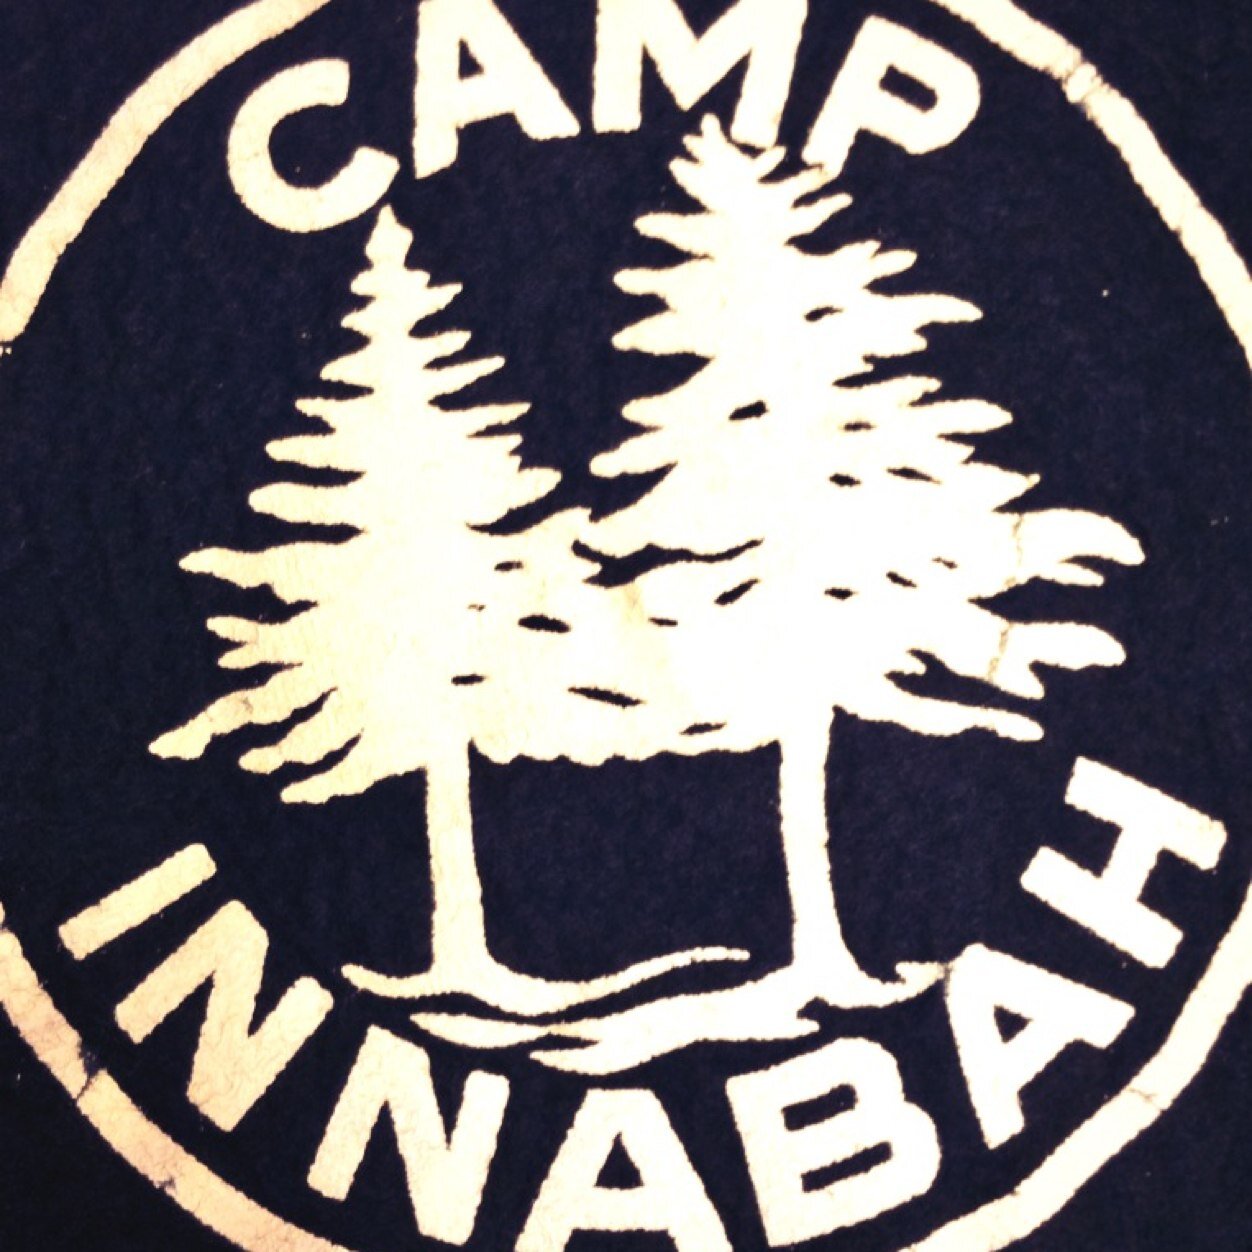 Innabah is a year round summer camp and retreat facility located in Spring City, PA. We are proud to be celebrating 85 years of service this summer!